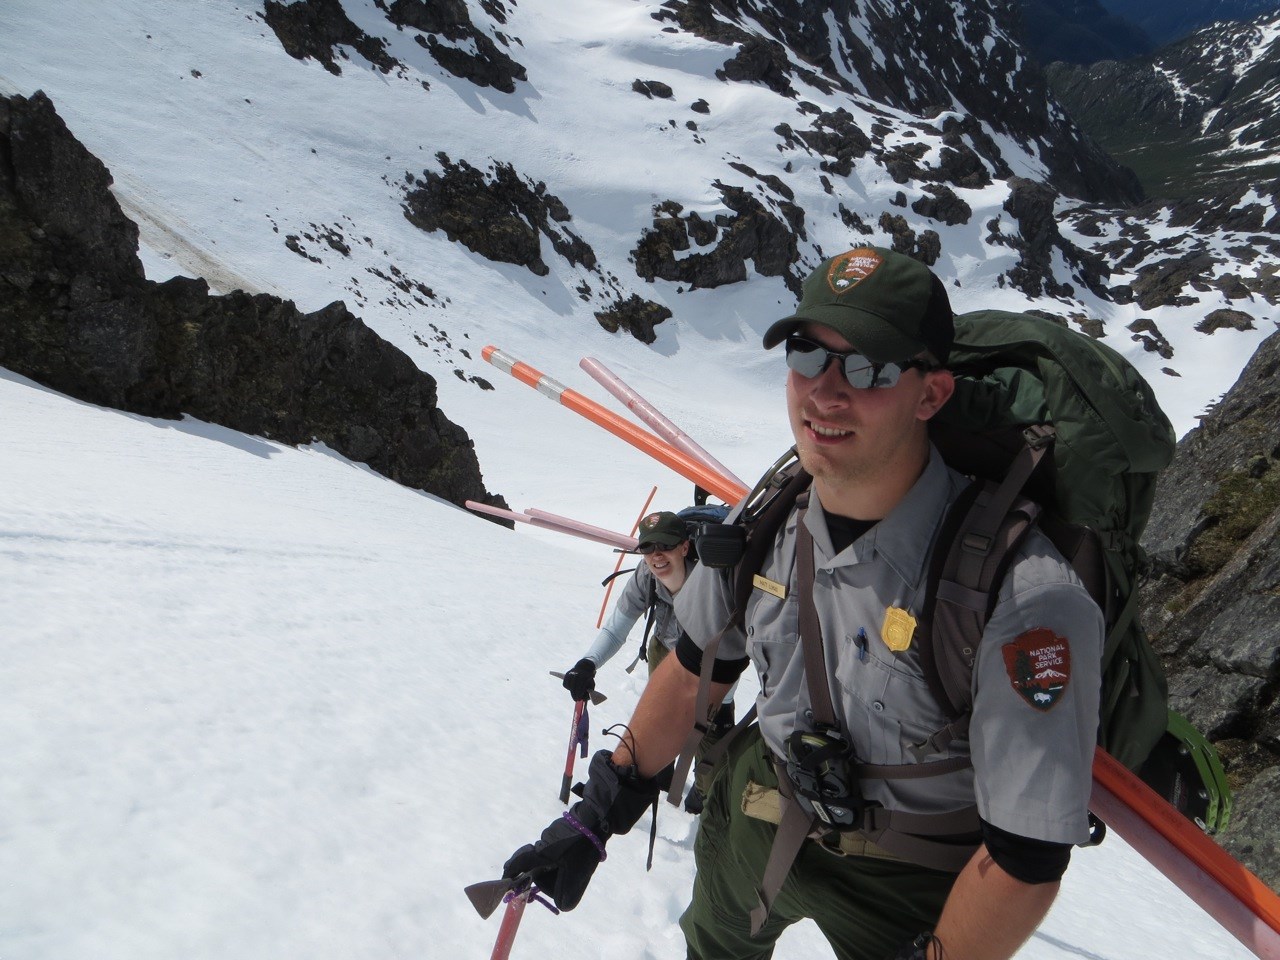 Two rangers carry trail markers up a steep, snowy mountain